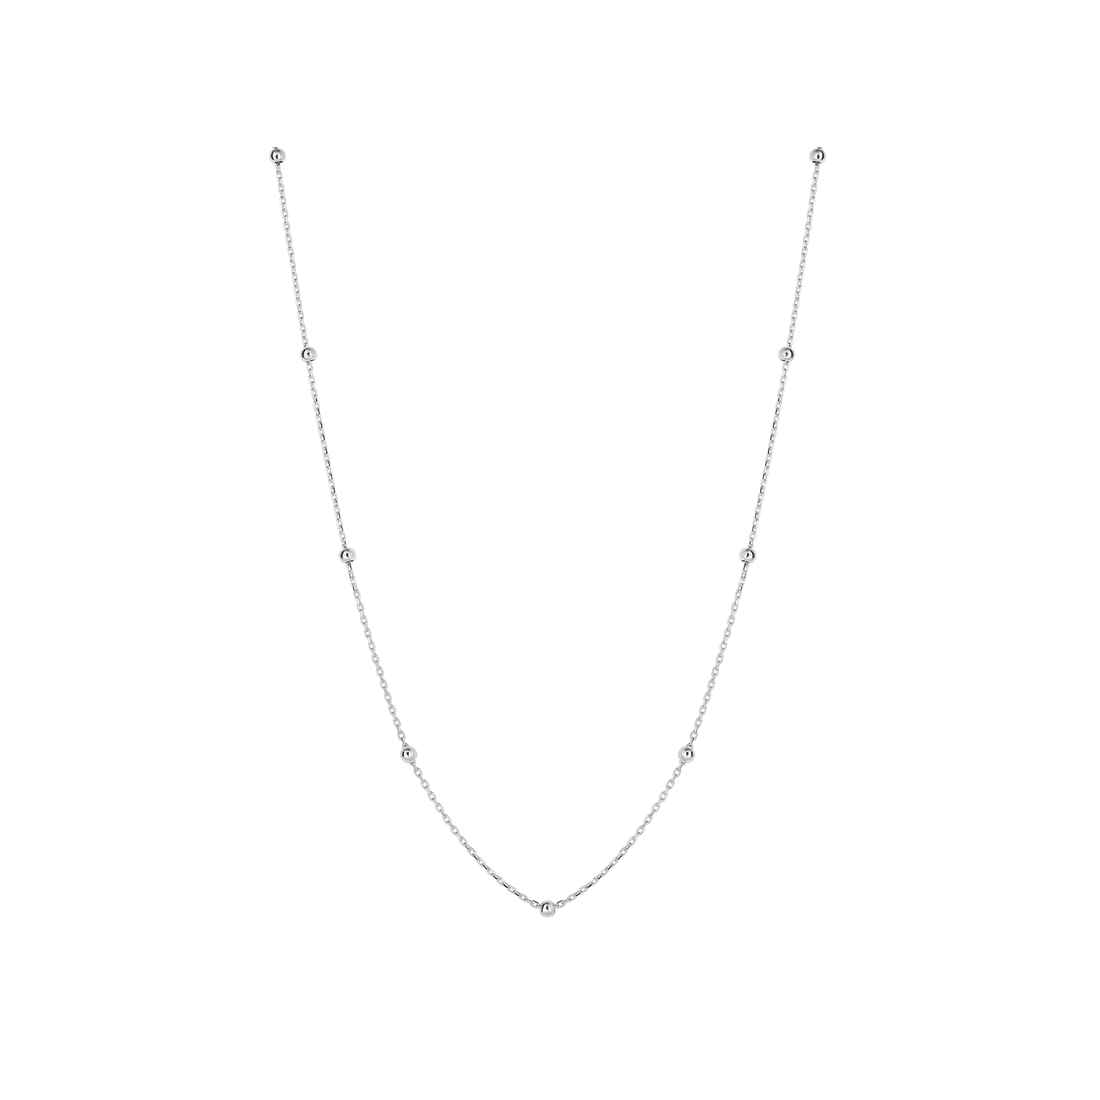 Station Ball Chain Necklace in 9ct White Gold - Robert Anthony Jewellers, Edinburgh